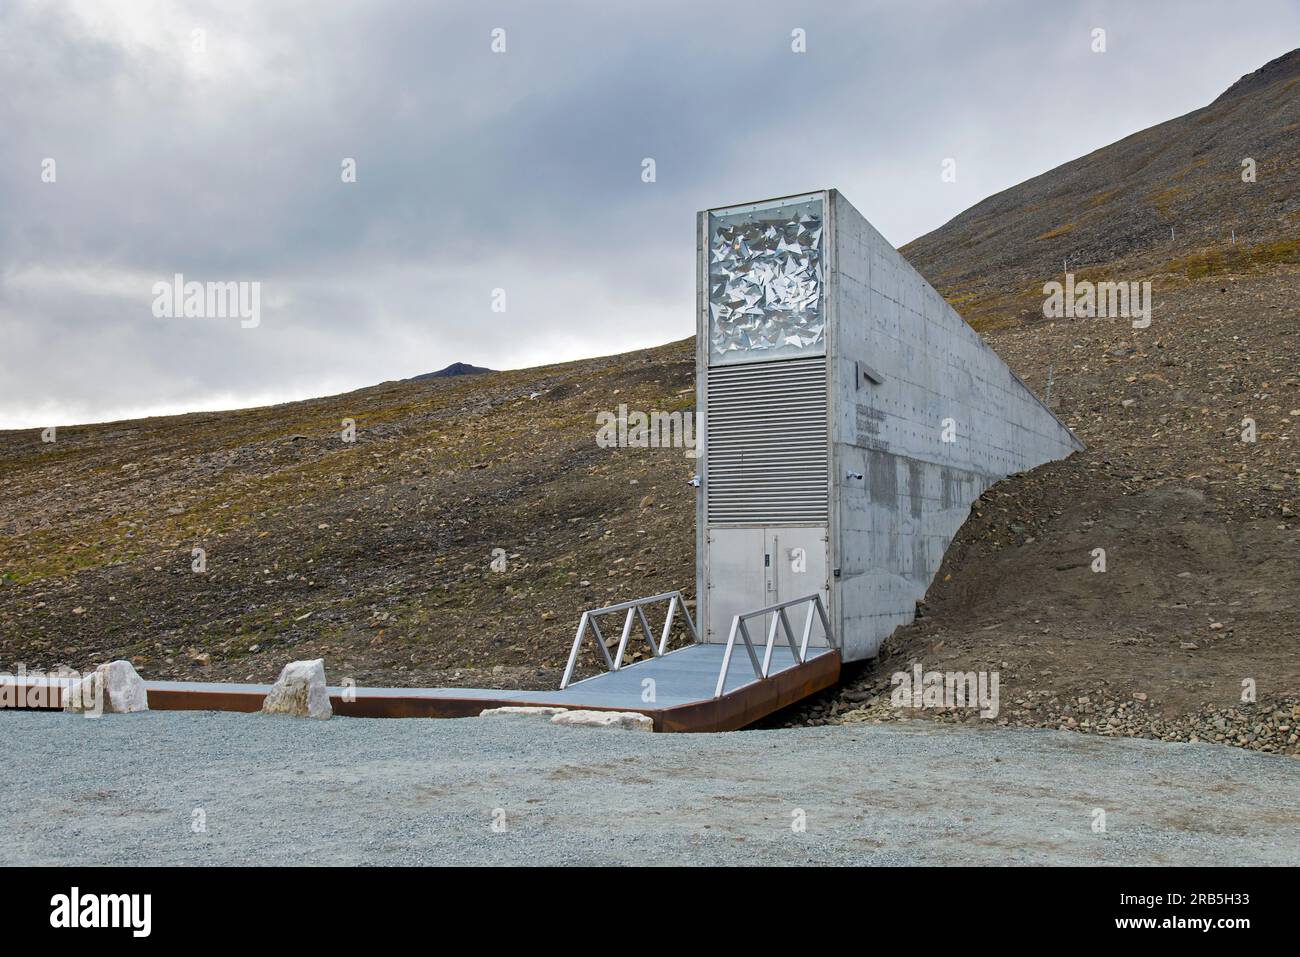 Entrance to the Svalbard Global Seed Vault, largest seed bank in the world and backup facility for the crop diversity near Longyearbyen, Spitsbergen Stock Photo